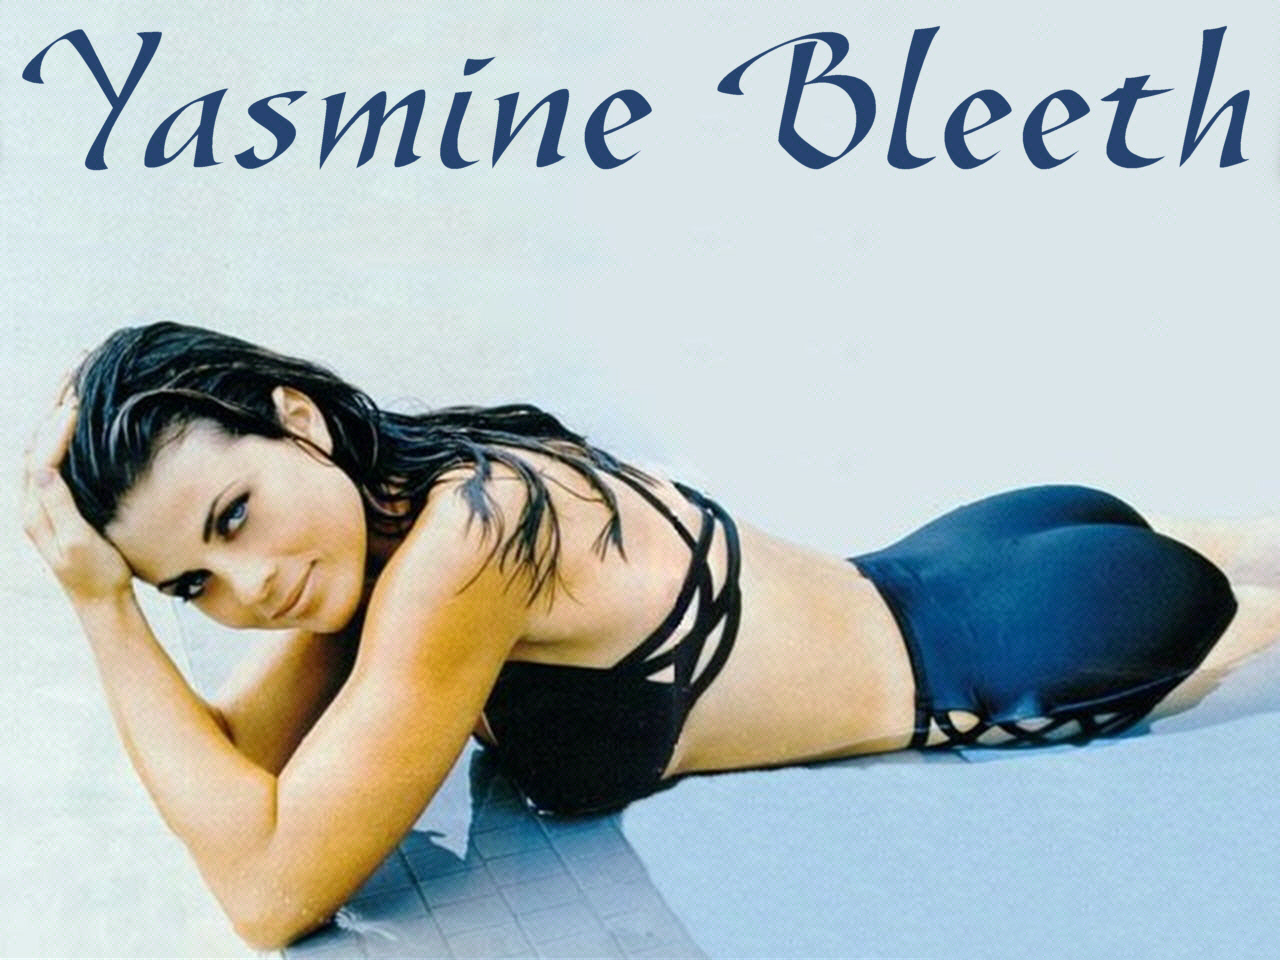 There are 44 more pics in the Yasmine Bleeth photo gallery. 